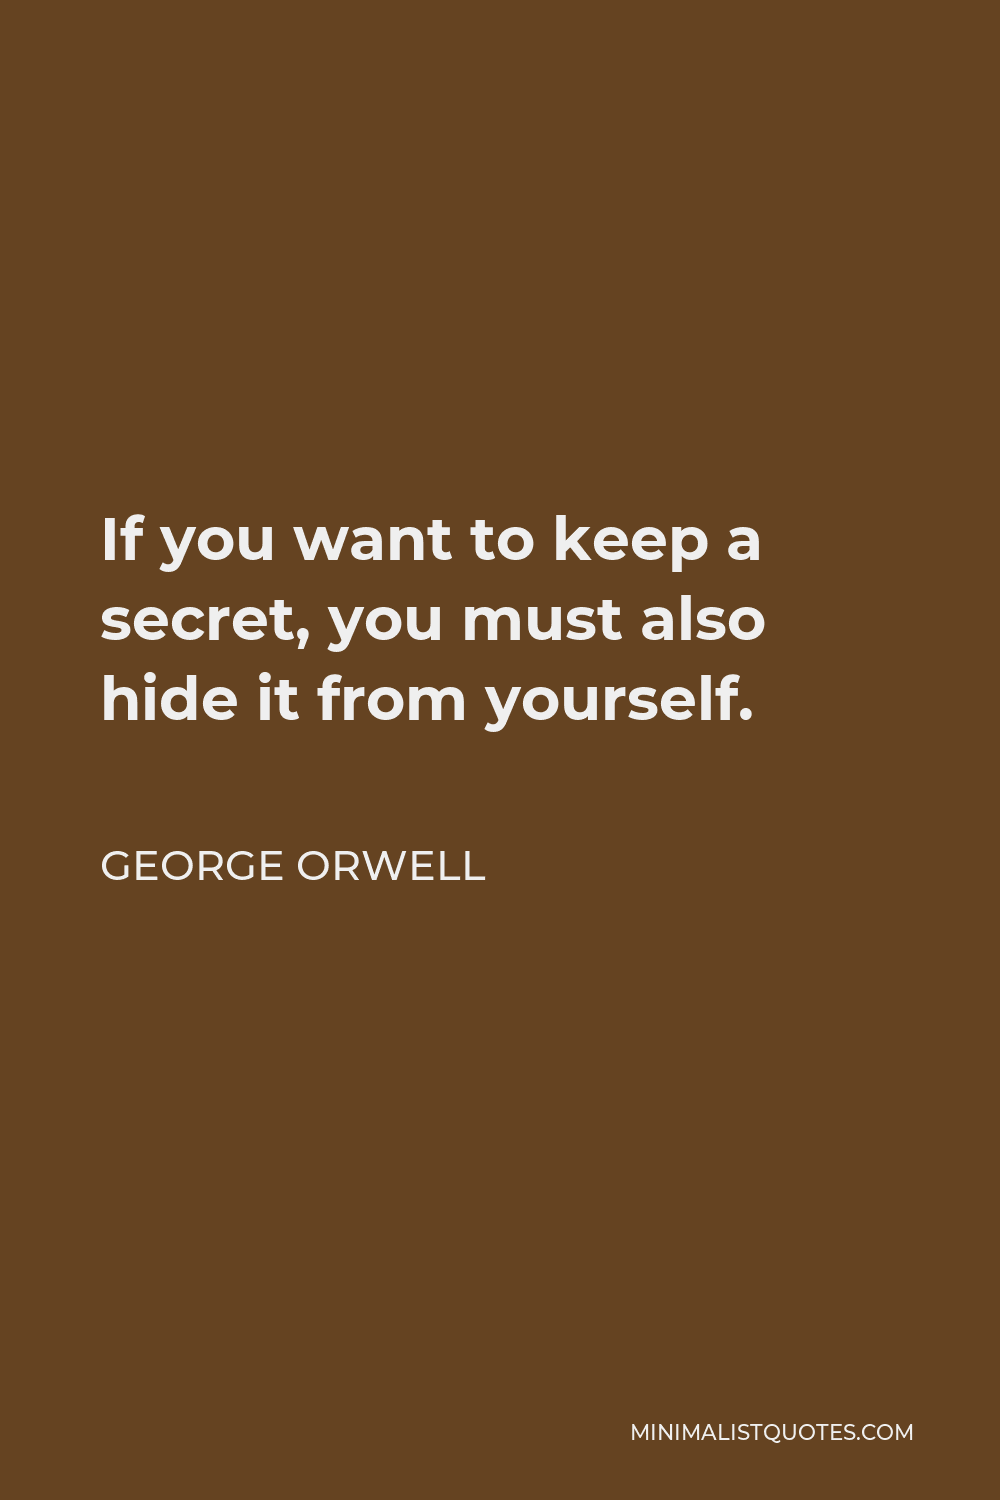 George Orwell Quote - If you want to keep a secret, you must also hide it from yourself.